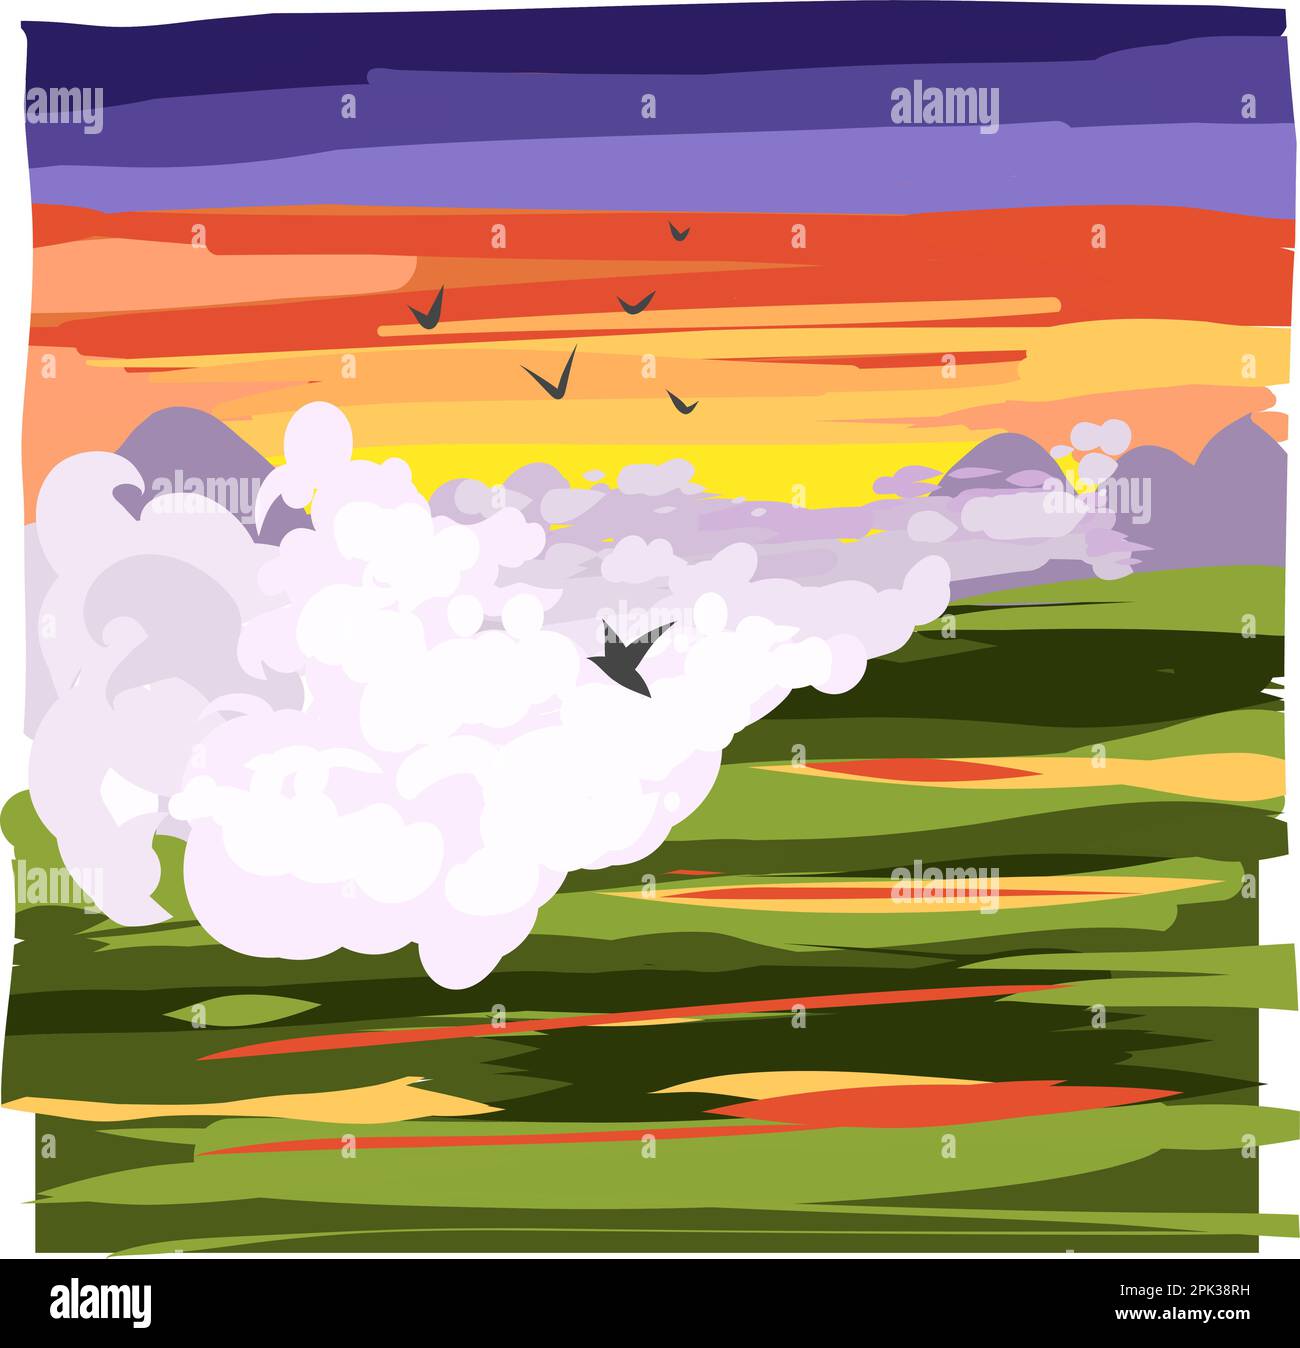 vector illustration of the landscape. sunset, clouds and birds. Stock Vector